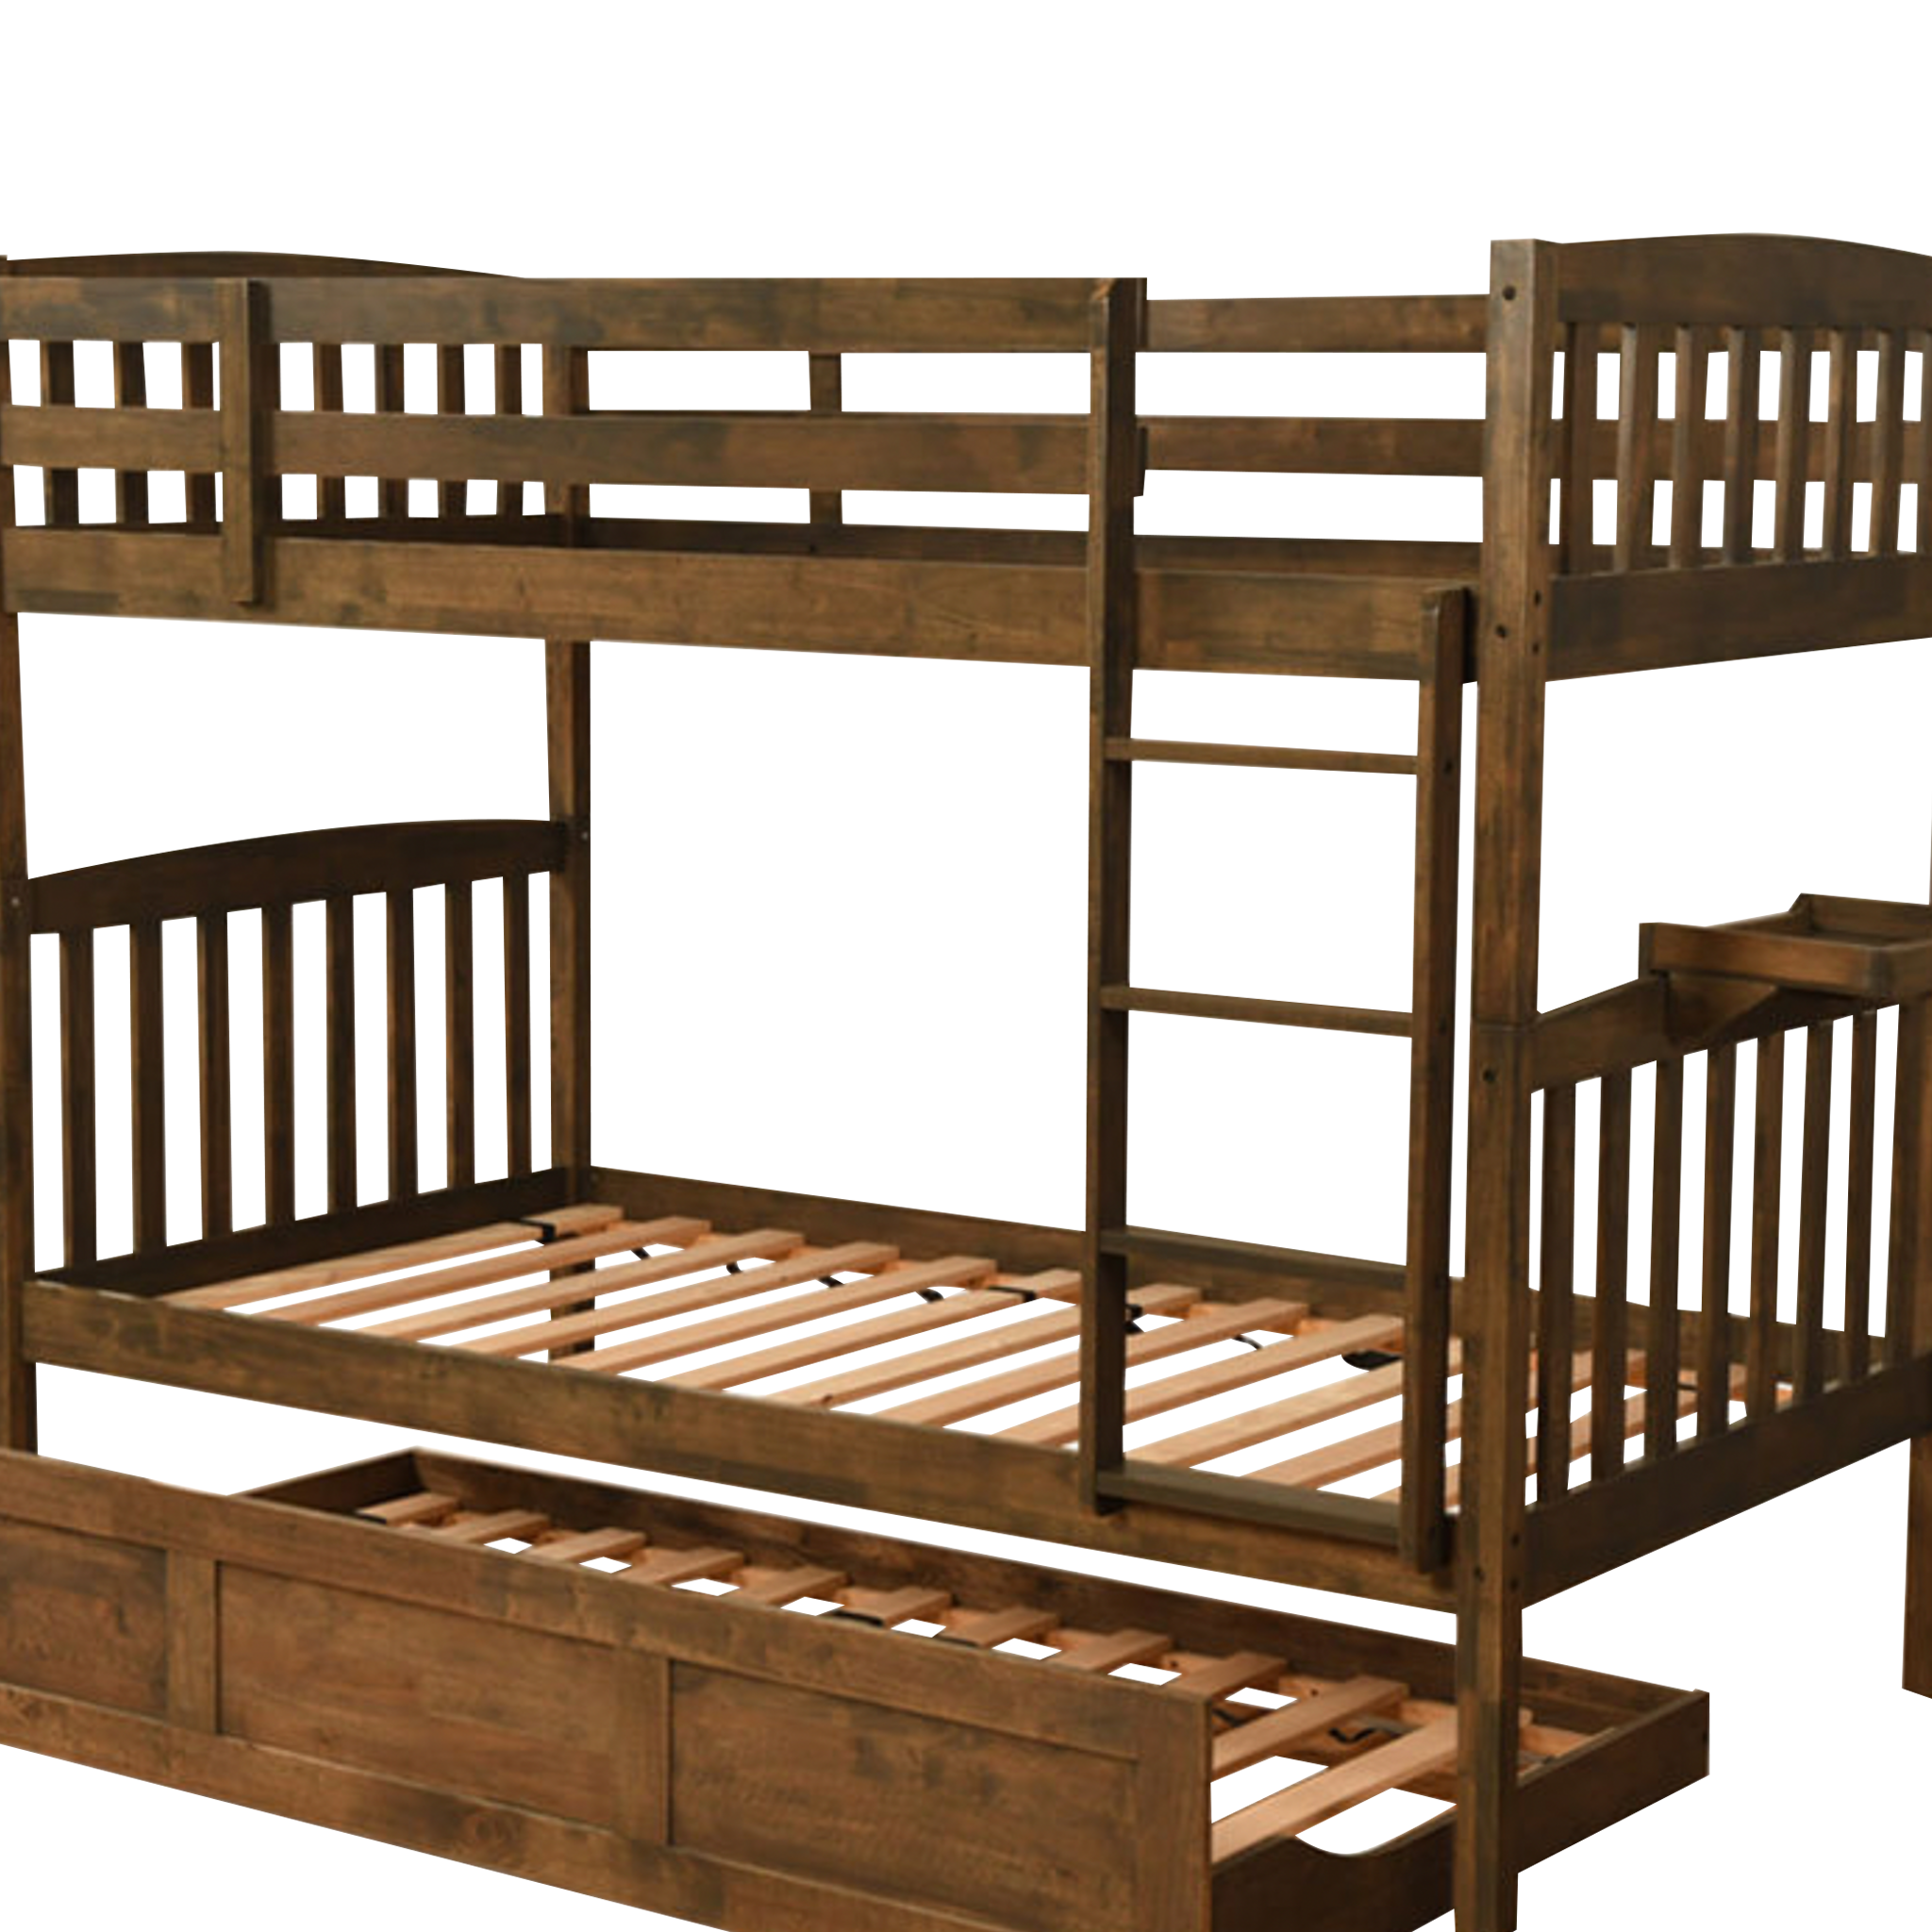 Kodiak Claire Bunk Bed With Trundle